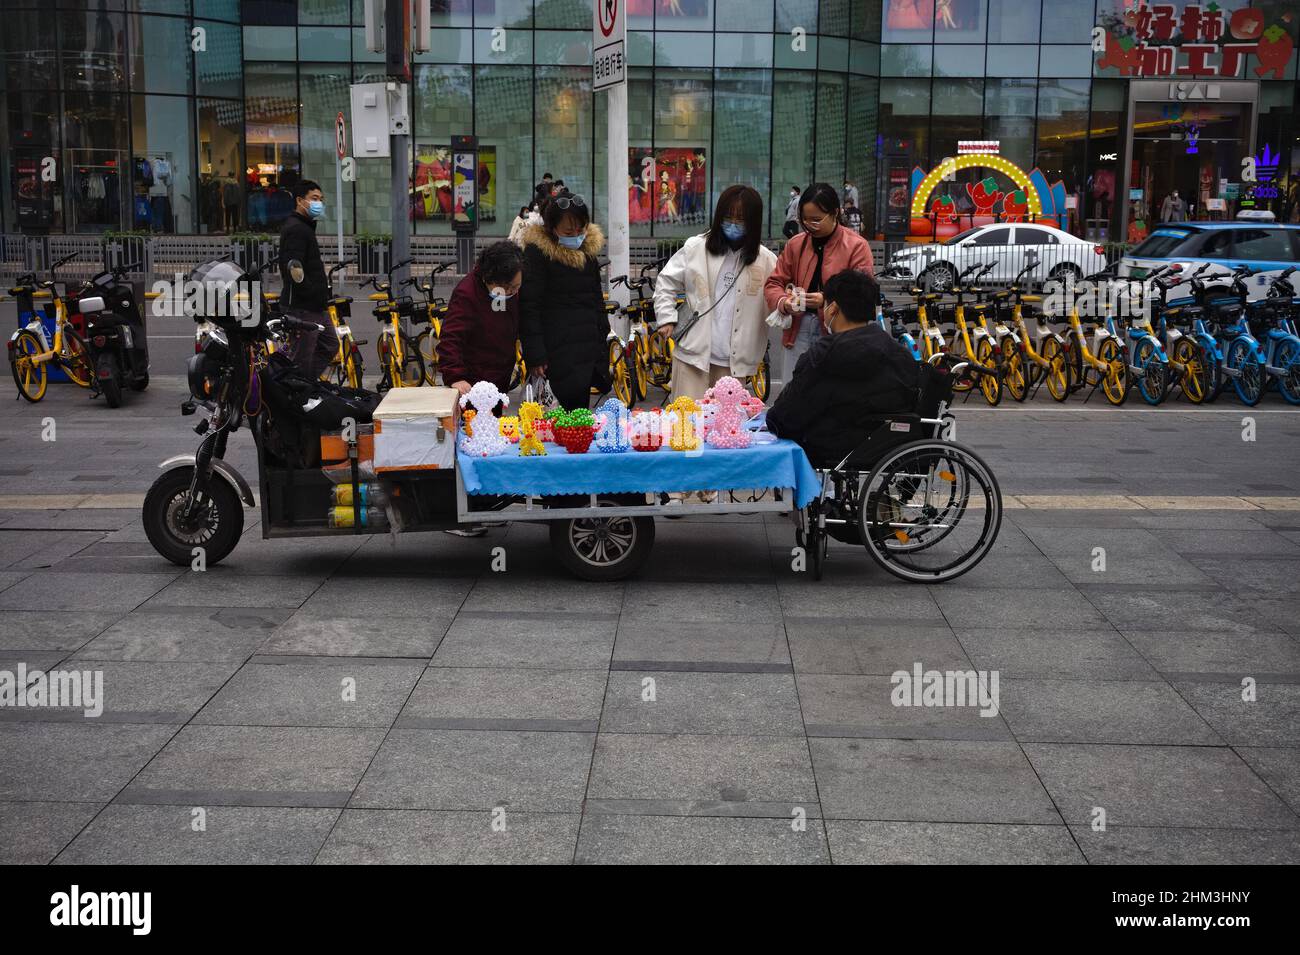 Interaction between wheelchair street vendor and customers in Shenzhen, China Stock Photo